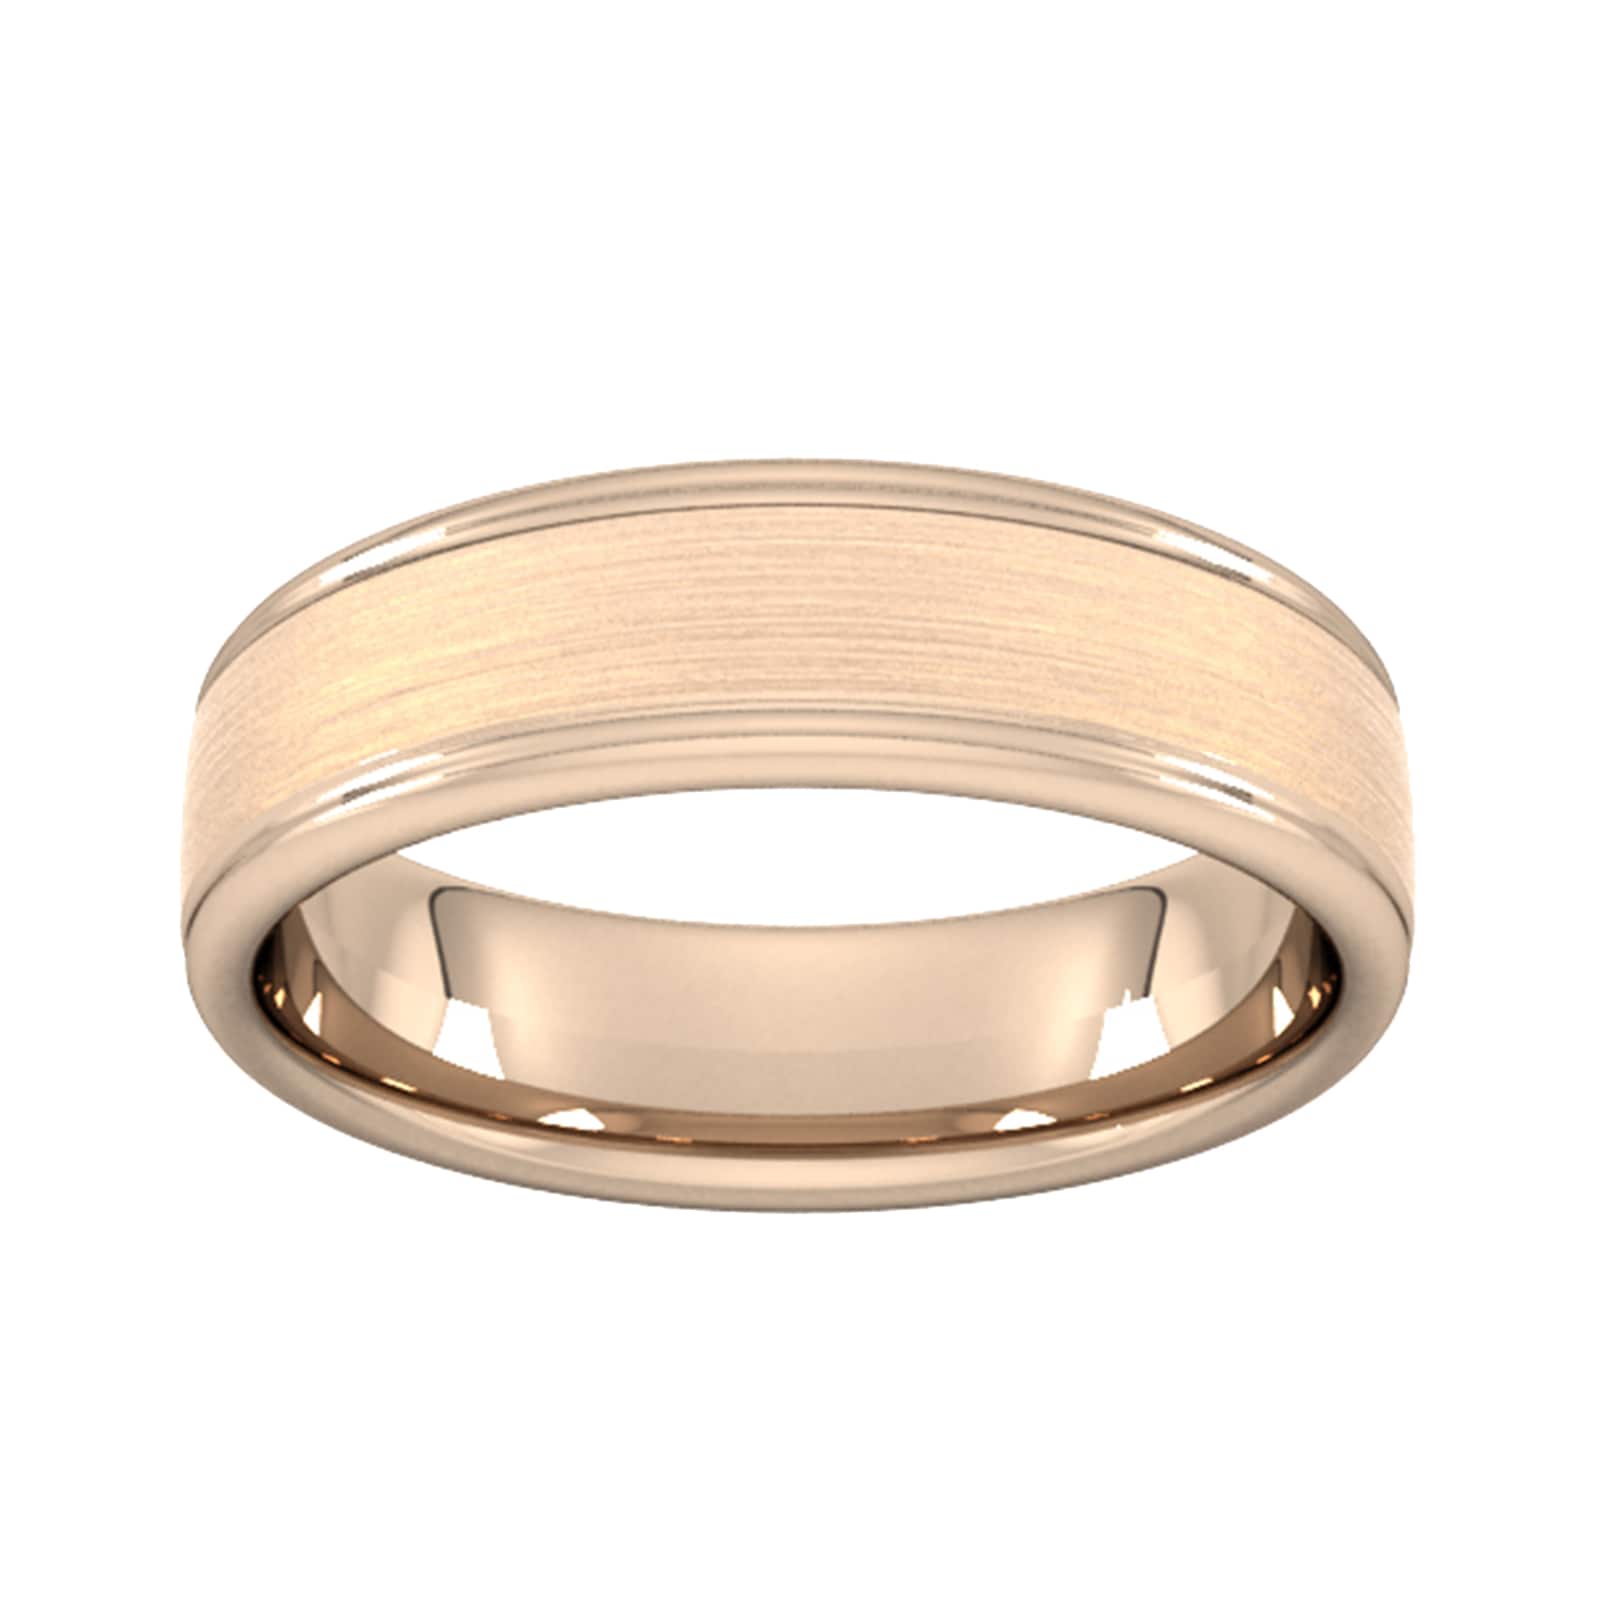 6mm D Shape Heavy Matt Centre With Grooves Wedding Ring In 18 Carat Rose Gold - Ring Size M